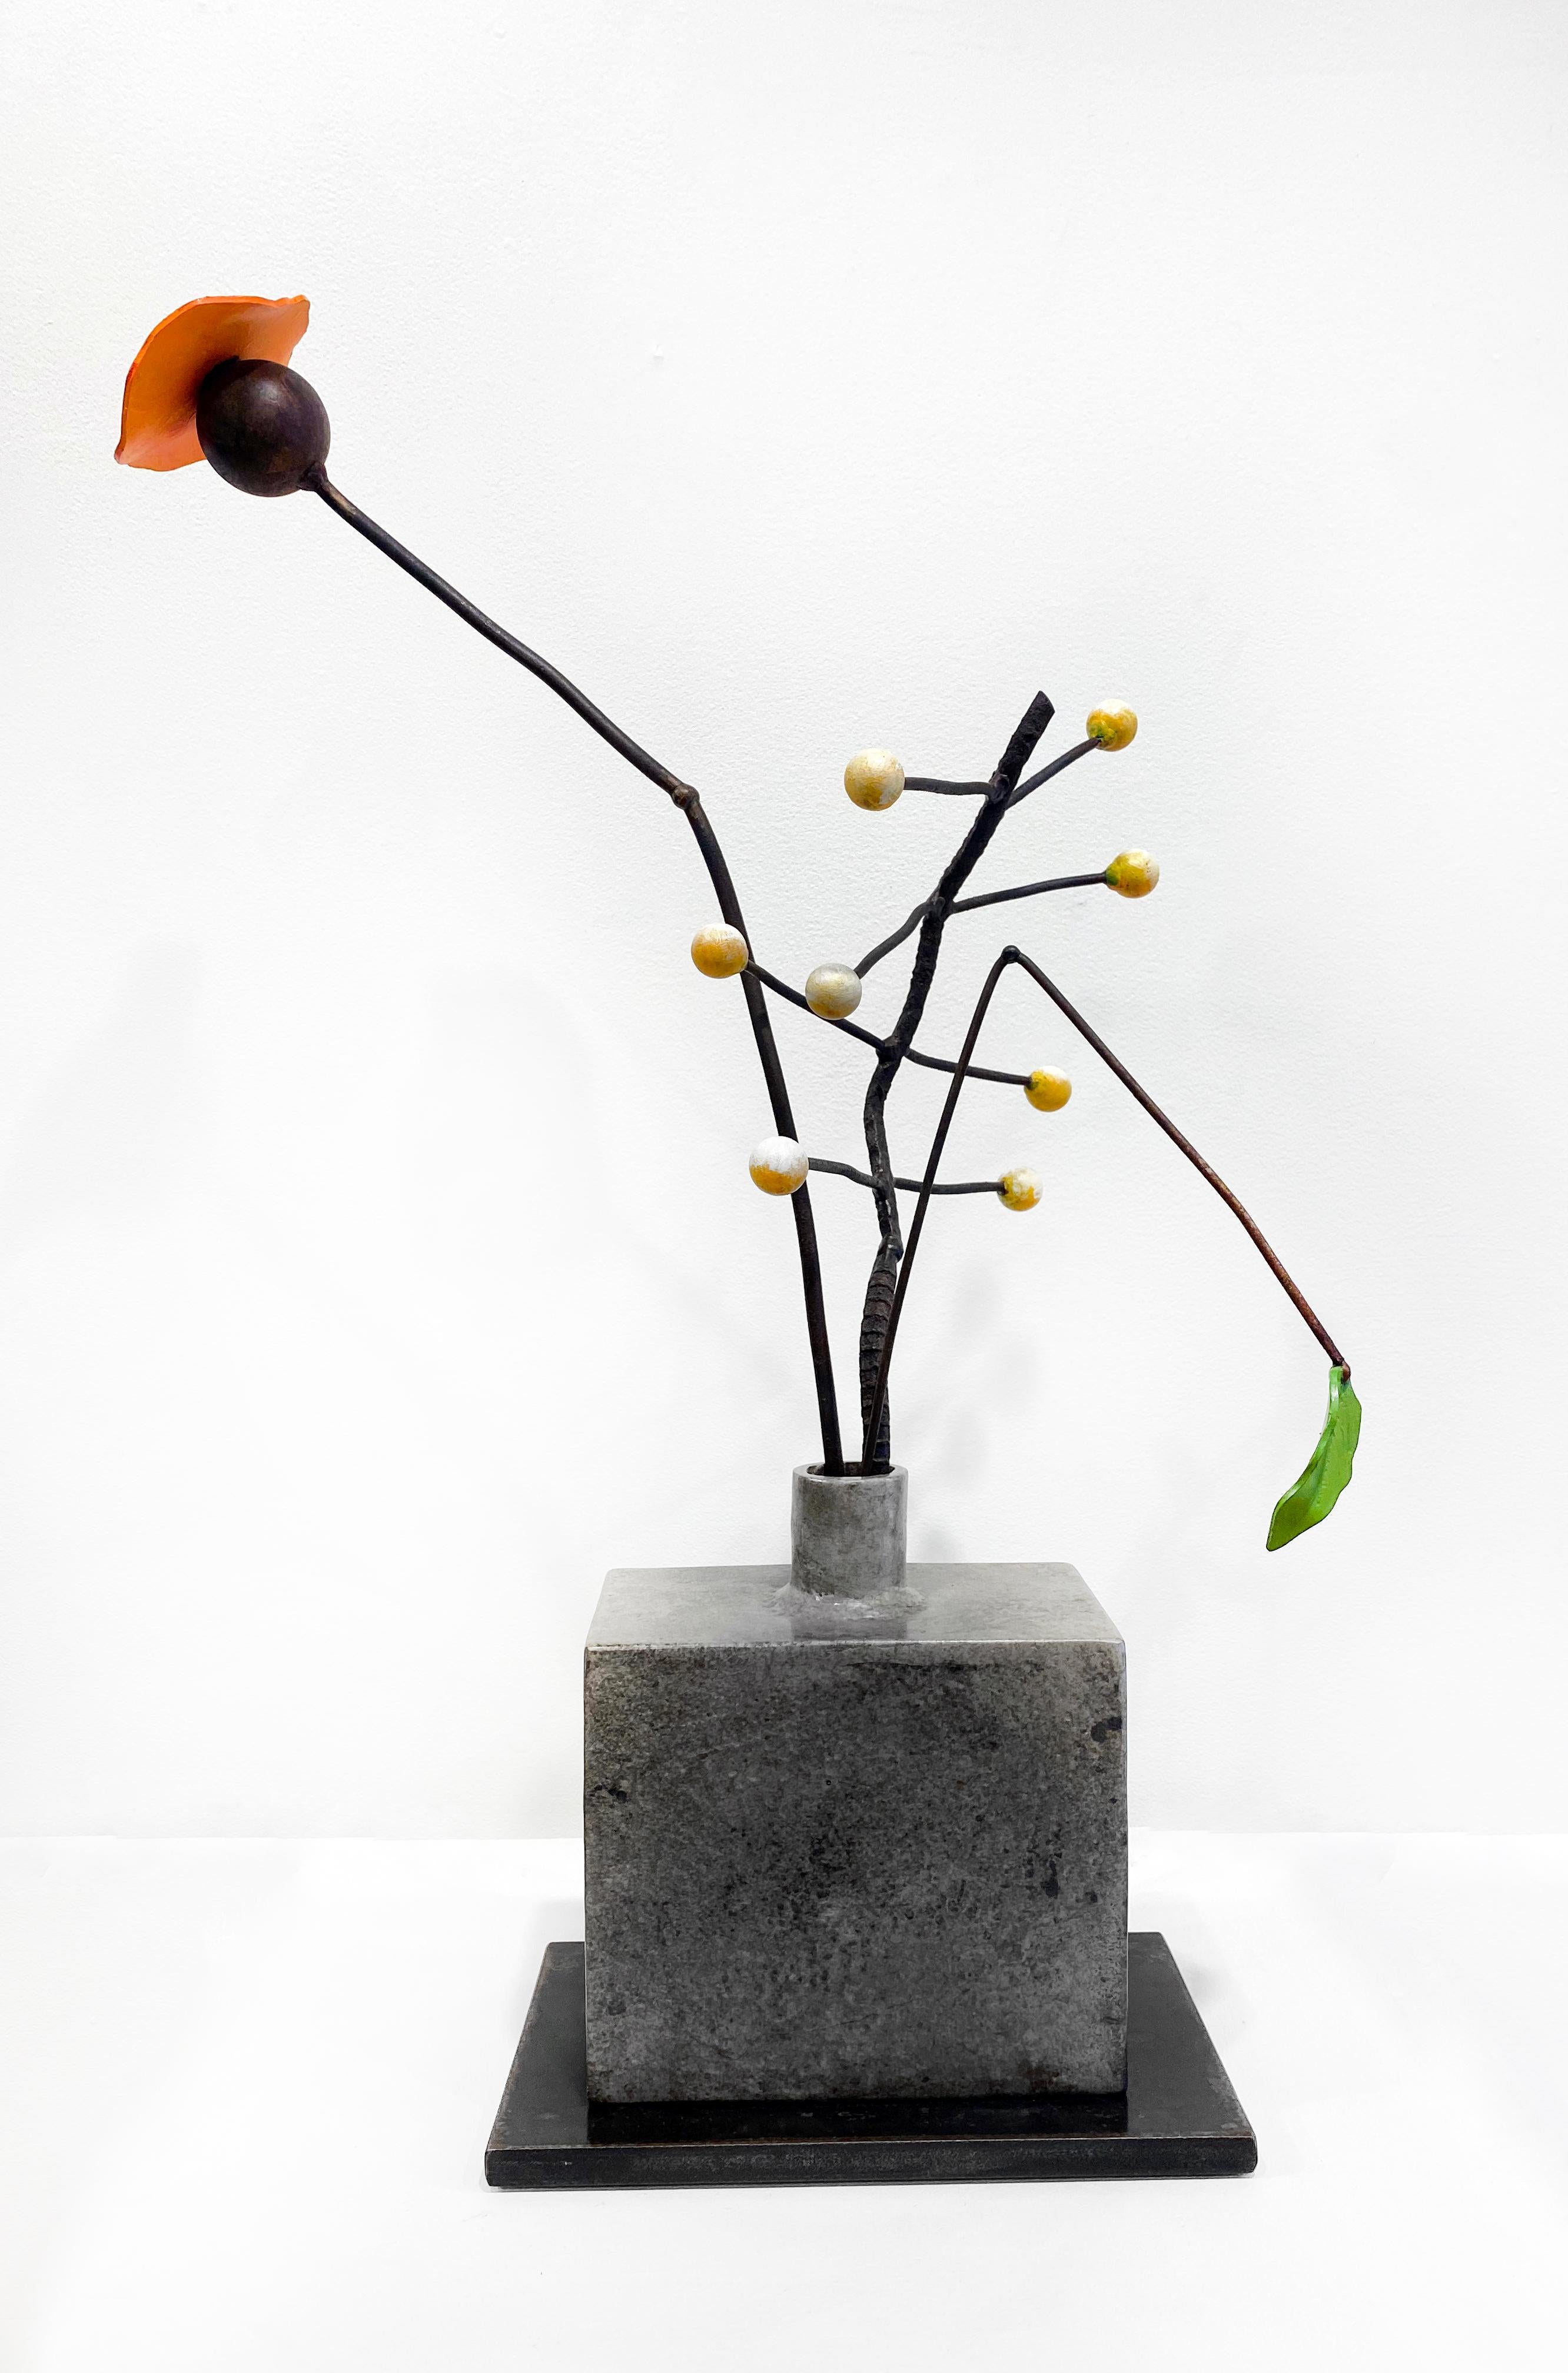 'Poppy, Seeds' by David Kimball Anderson, 2021. Bronze, steel, and paint, 26 x 20 x 8 in. This sculpture features a square vase cast in bronze and finished with a grey patina. It features a series of white bulbs extending from bronze branches, a